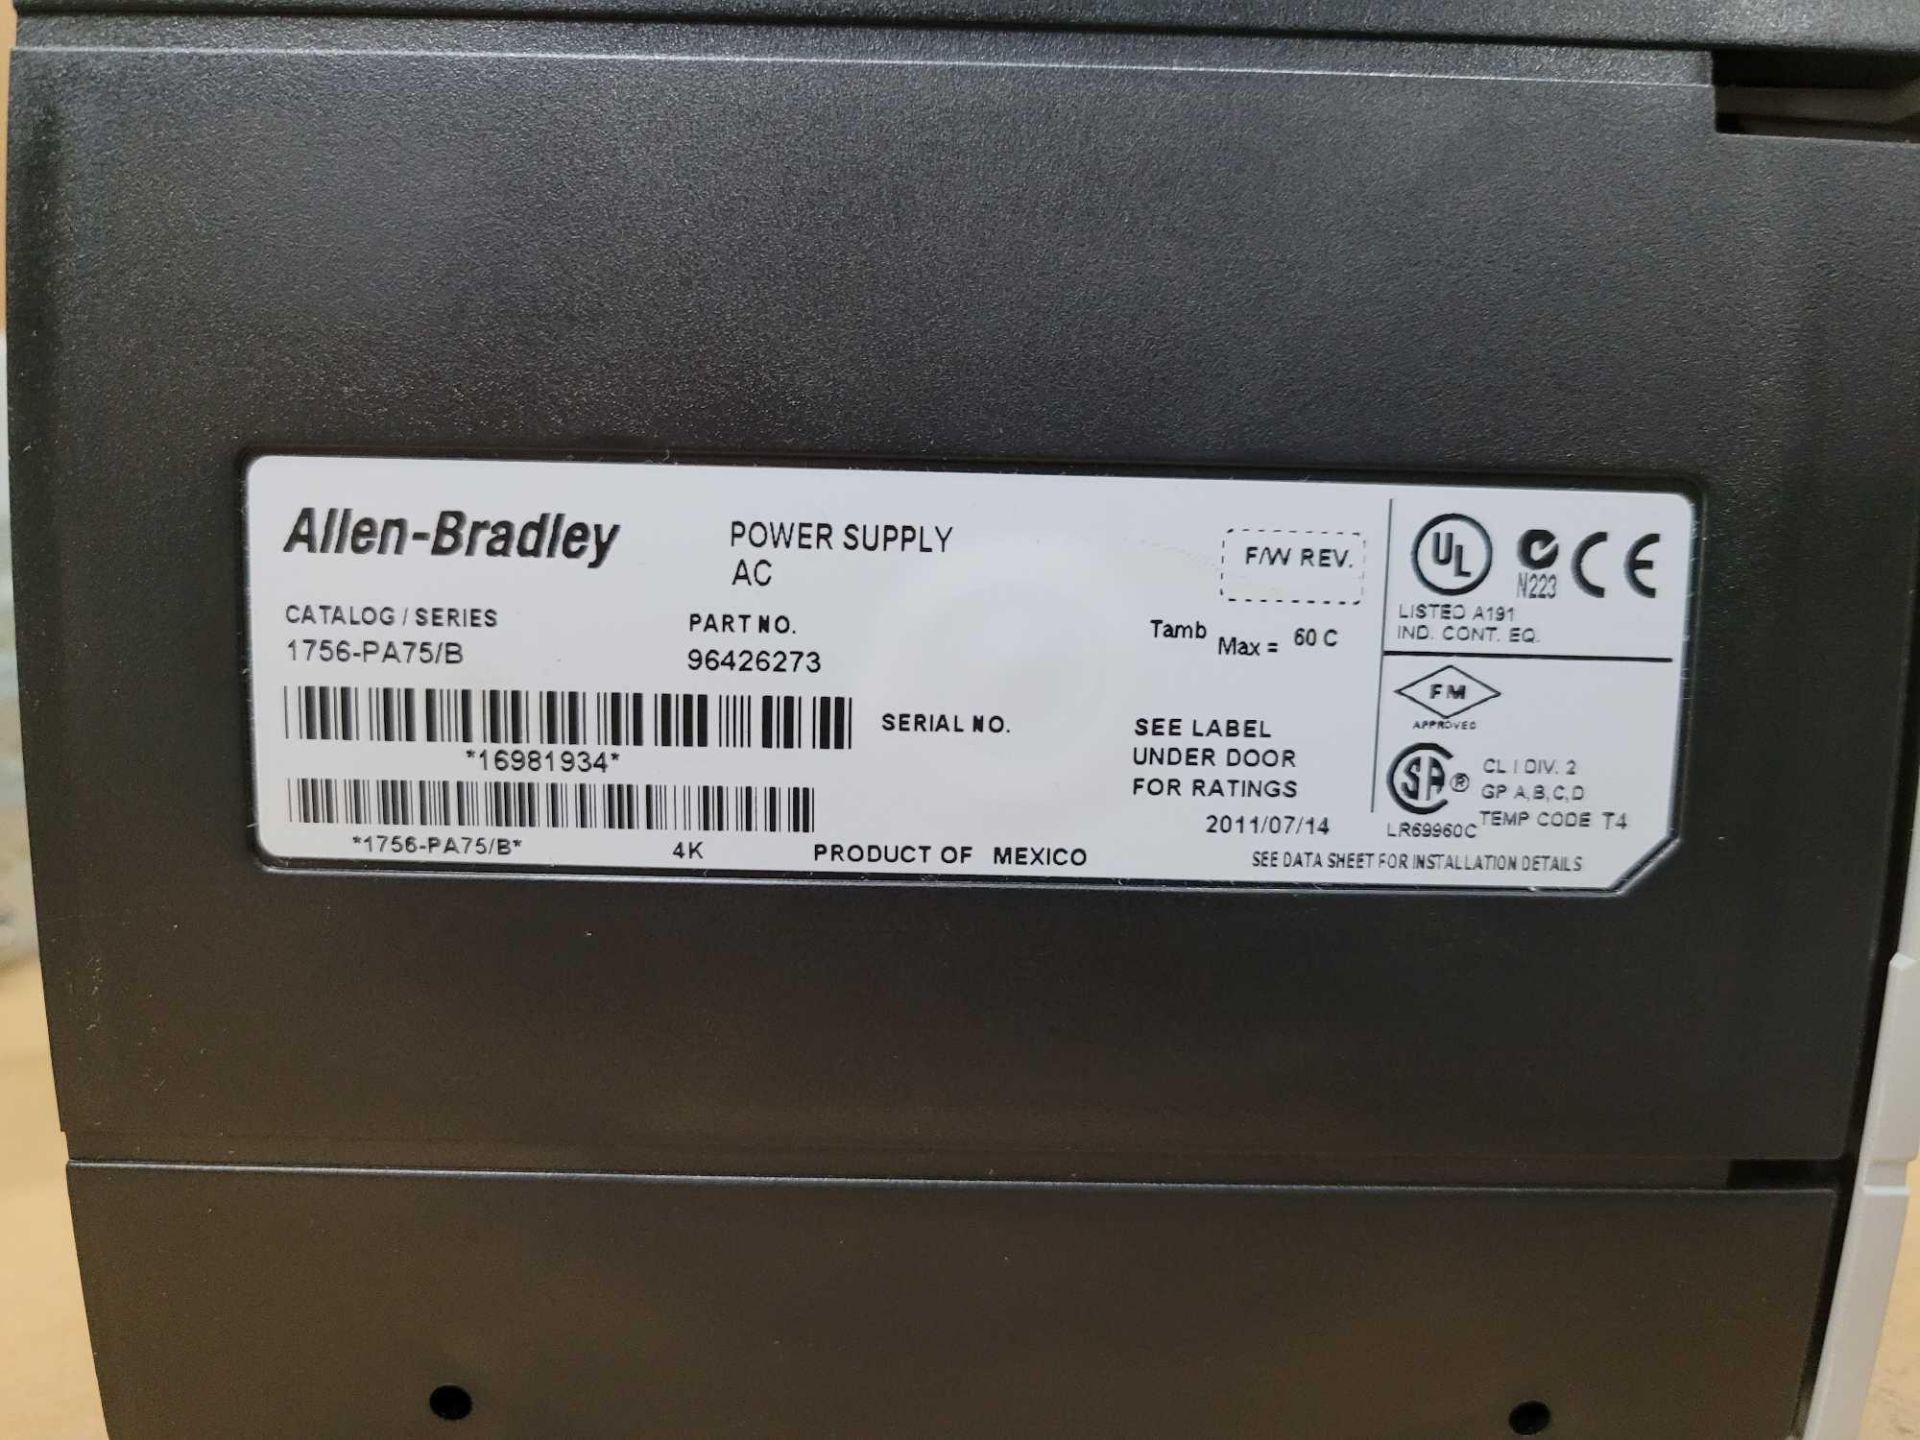 LOT OF 2 ALLEN BRADLEY 1756-PA75 /B AC POWER SUPPLY W/ 1756-A10 /B 10 SLOT CHASSIS - Image 3 of 4